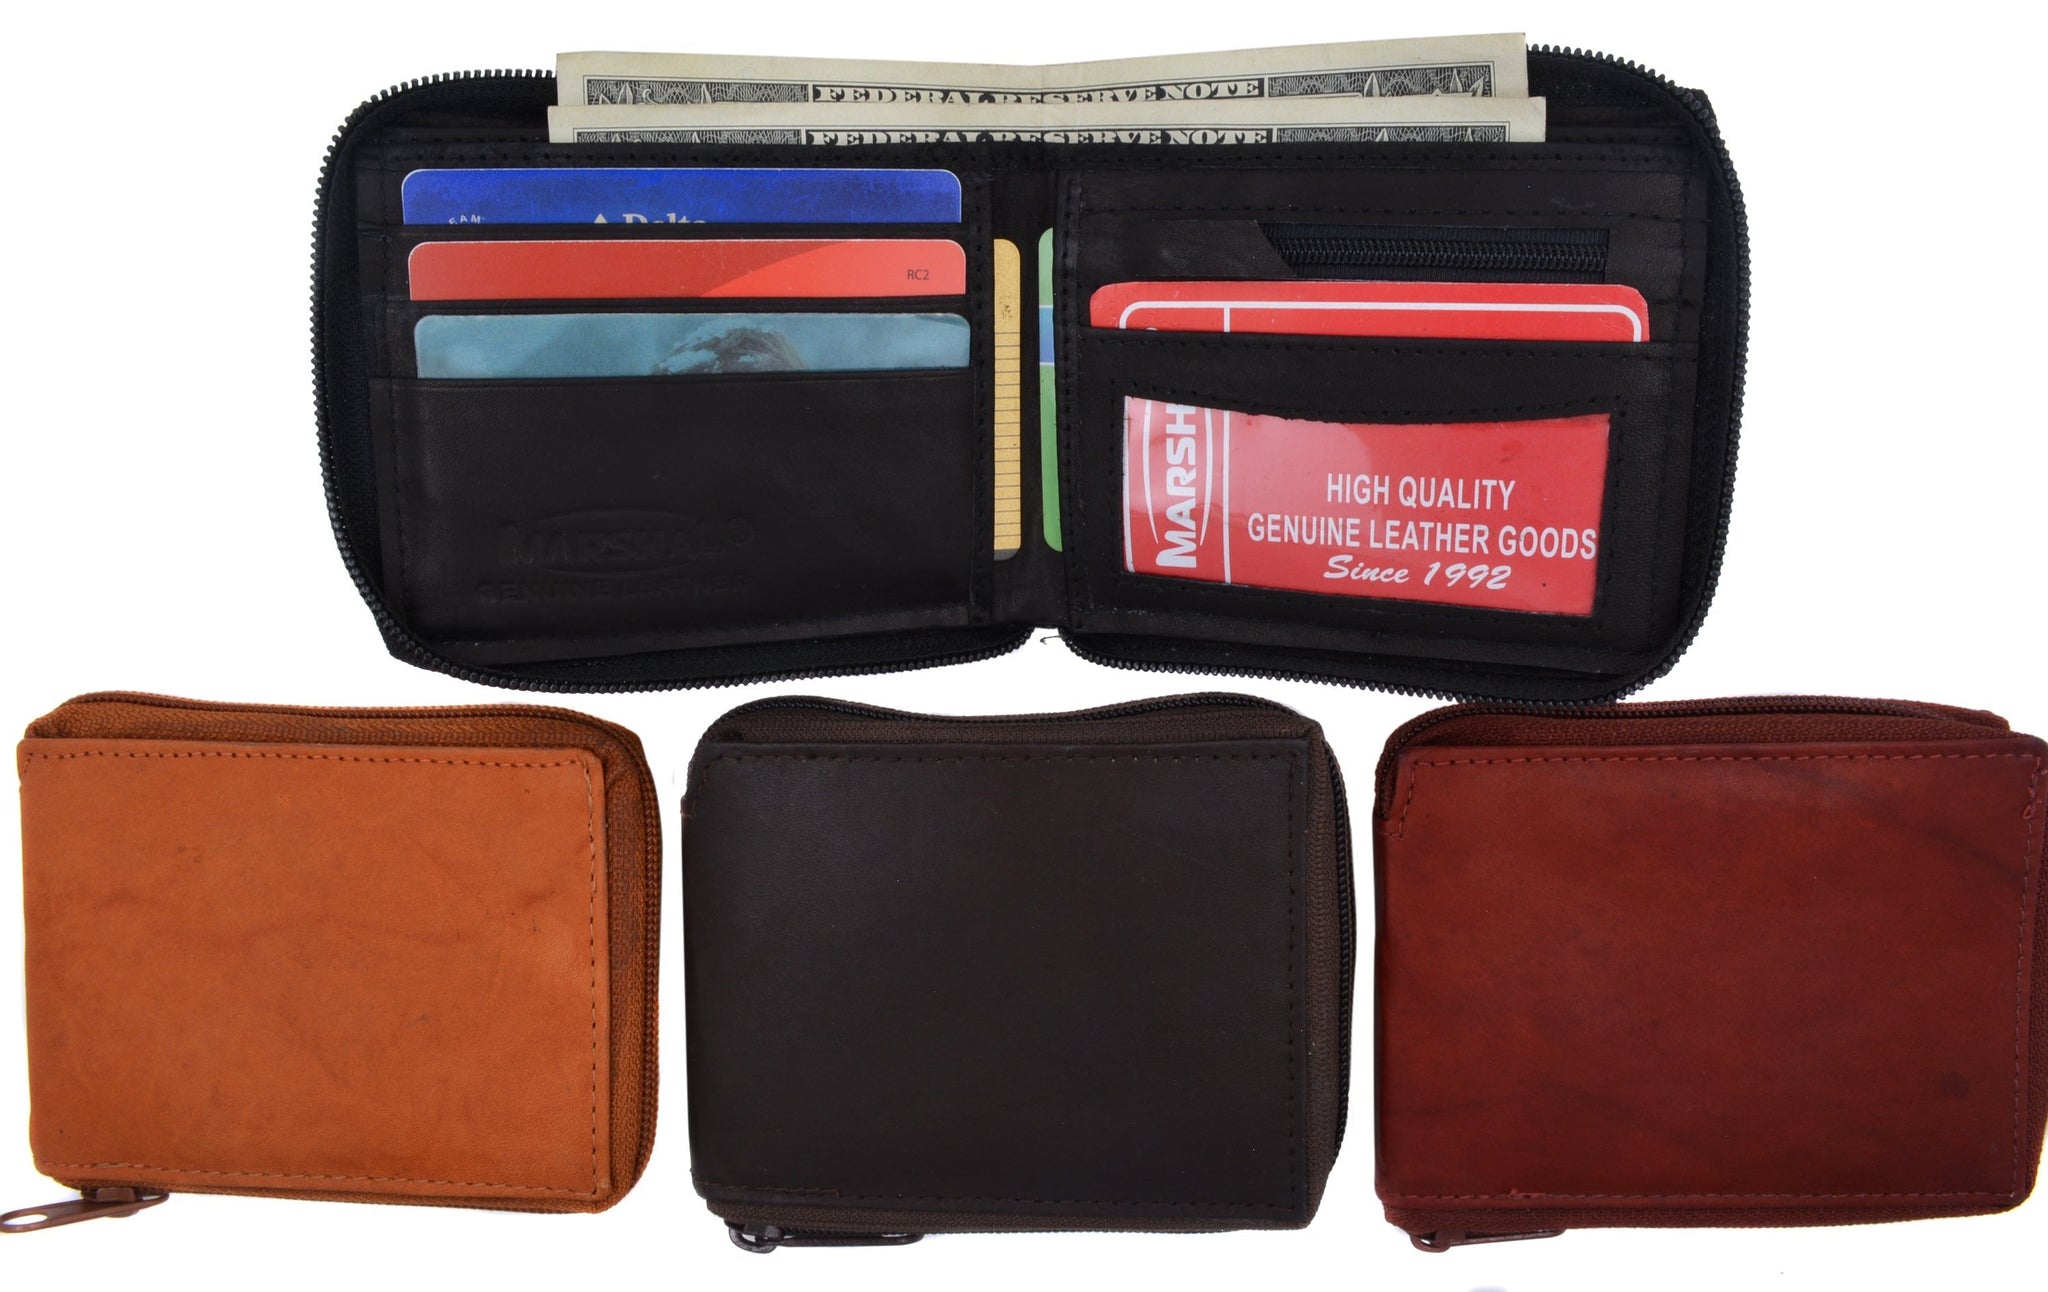 Marshal Wallet Marshal Men's Credit Card Holder with ID Window and Zipper Pouch, Size: One size, Black